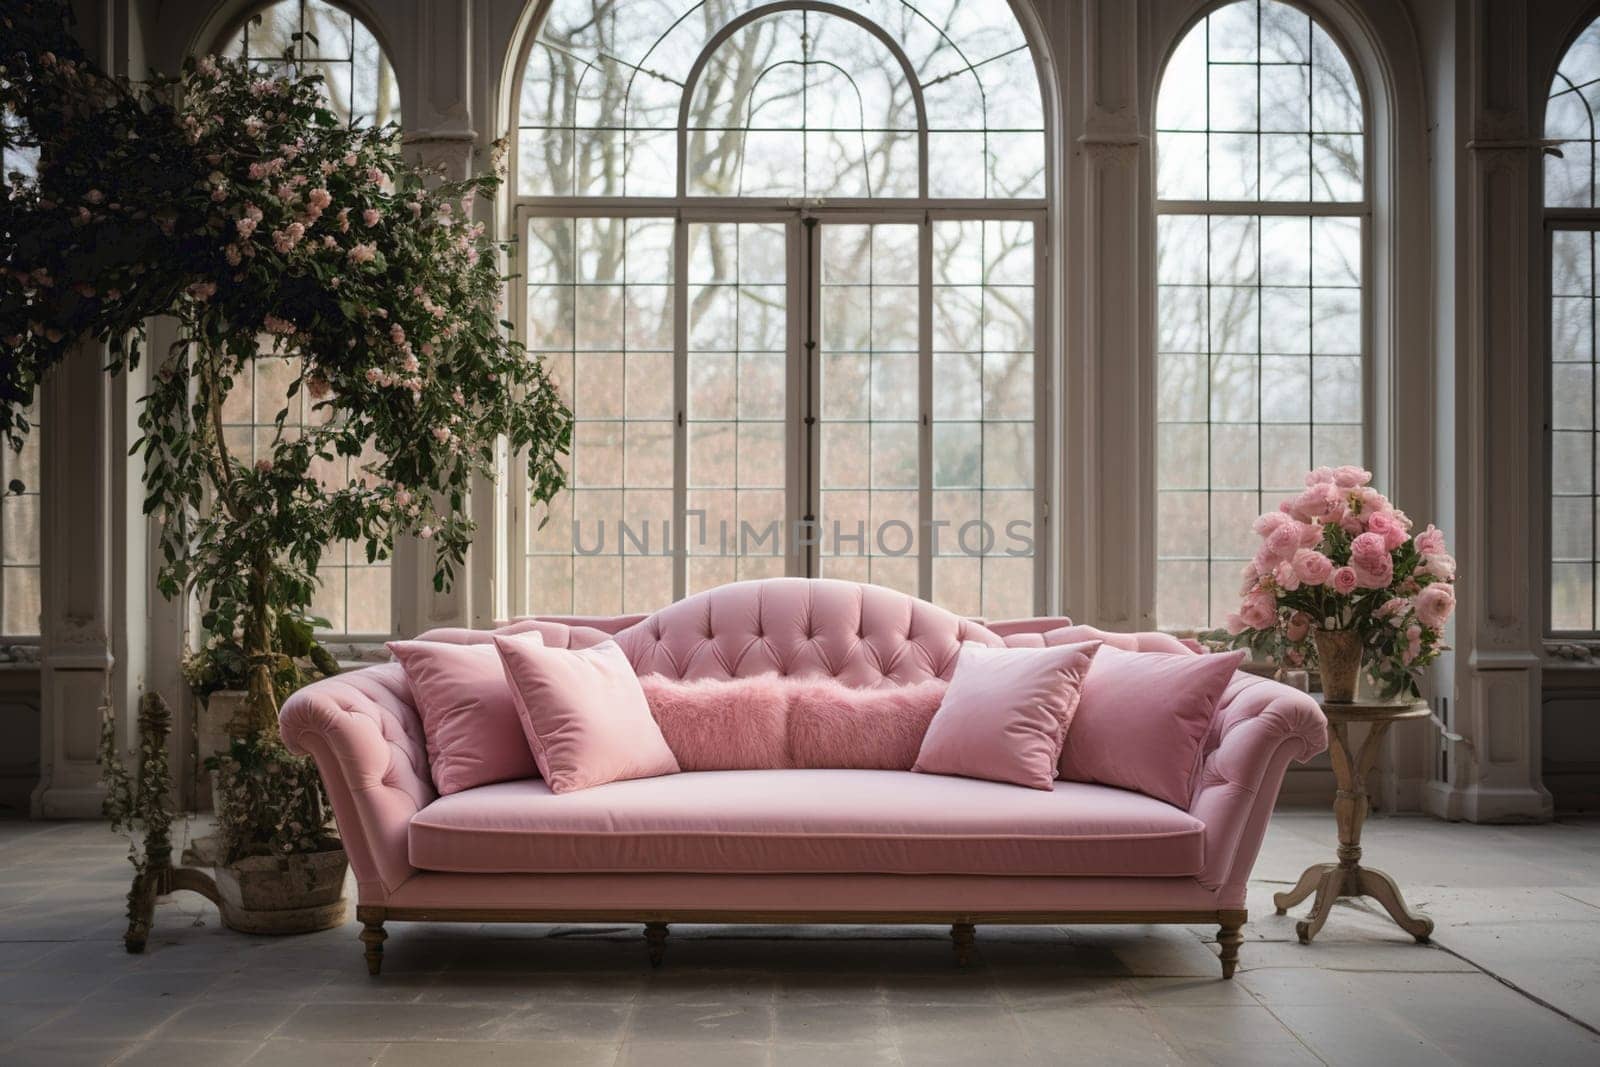 Pink velvet couch in the room with grey walls and flowers. High quality photo